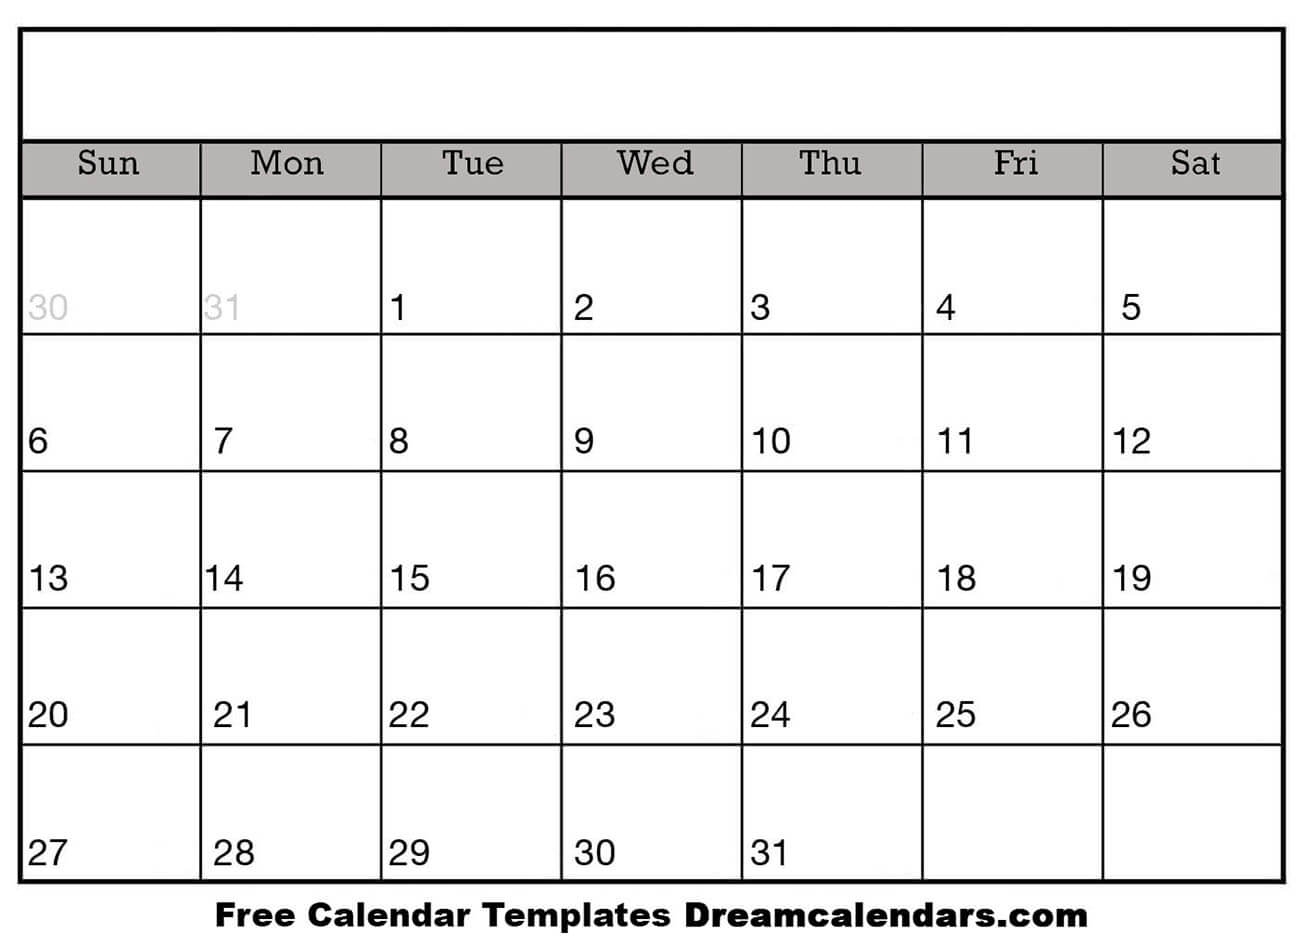 Calendars That List Days Numbered Calendar Template 2021 Two Months